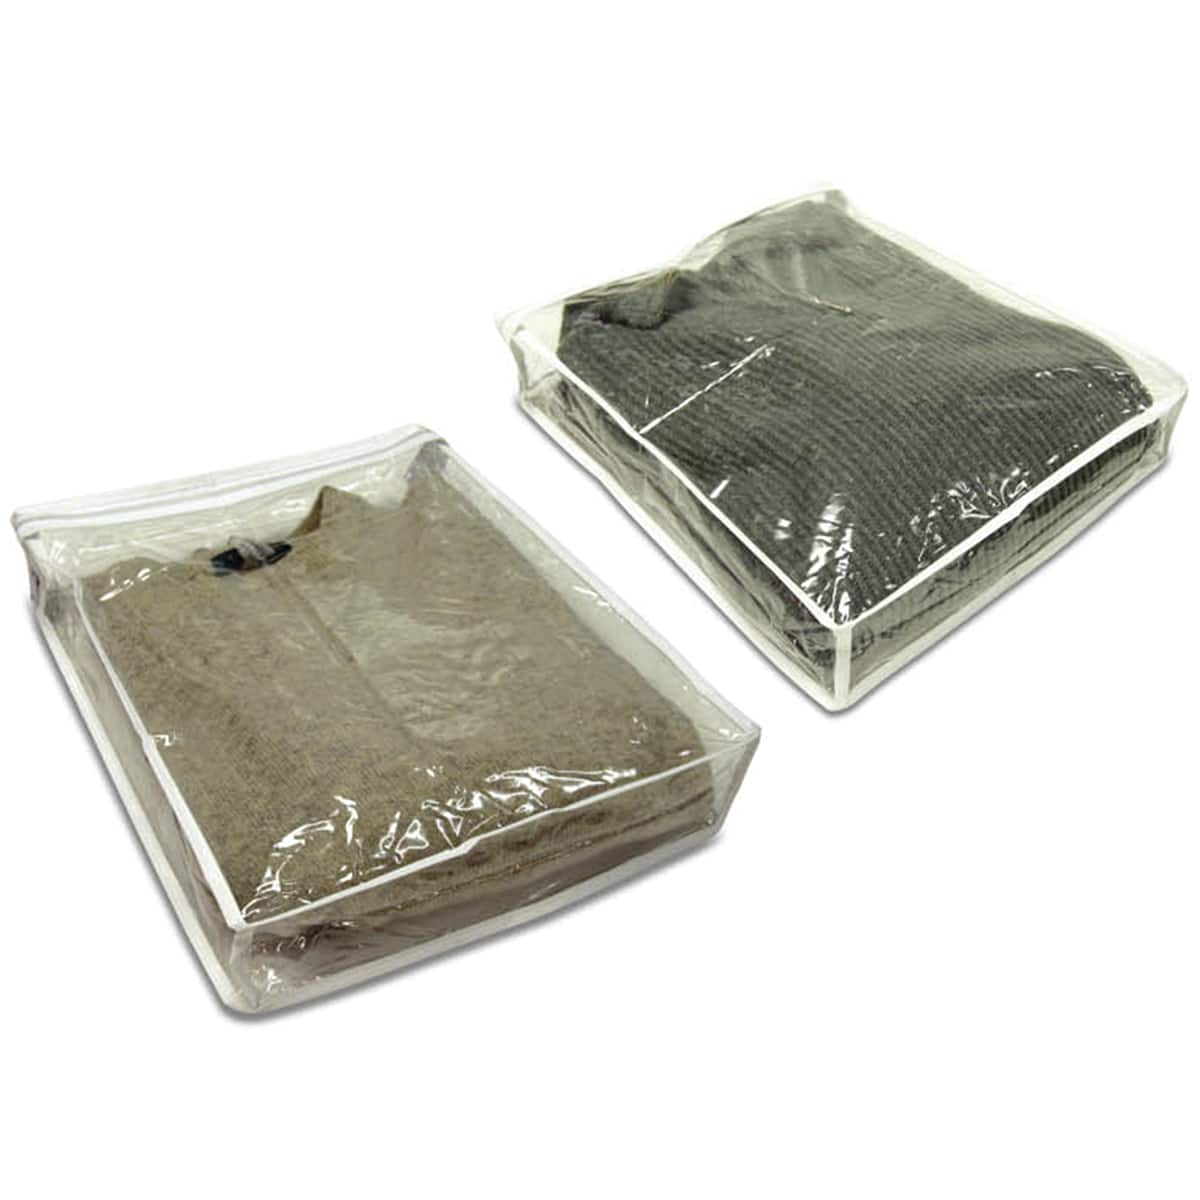 Innovative Home Creations Sweater Storage Bags, 2ct.